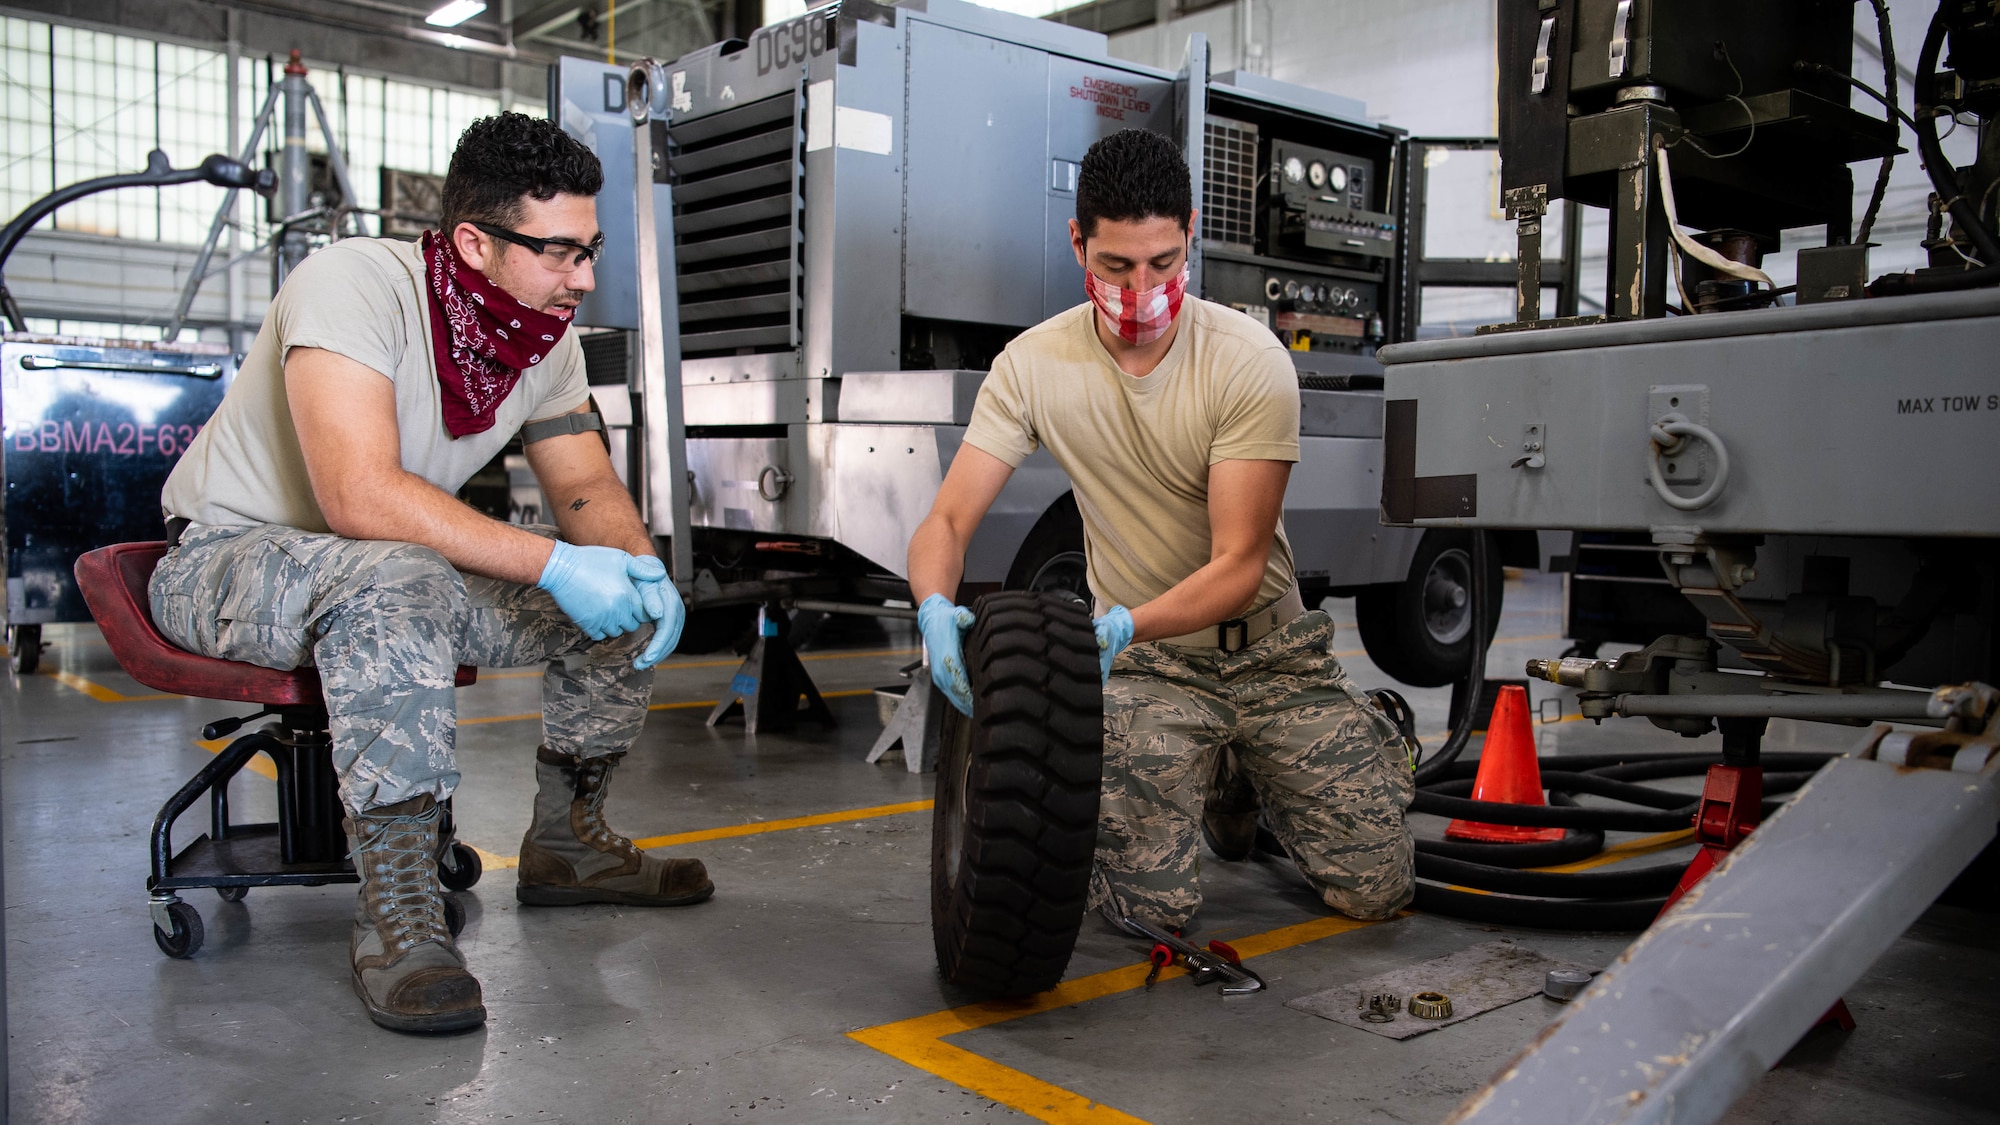 Senior Airman Benjamin A. Malian, 2nd Maintenance Squadron aerospace ground equipment craftsman, and Airman 1st Class Isaiah E. Nieves, 2nd MXS AGE journeyman, replace a tire on a -95 start cart at Barksdale Air Force Base, La., June 10, 2020. Second MXS AGE mechanics maintain and repair all the equipment that is used to service Barksdale's B-52H Stratofortresses. (U.S. Air Force photo by Airman 1st Class Jacob B. Wrightsman)